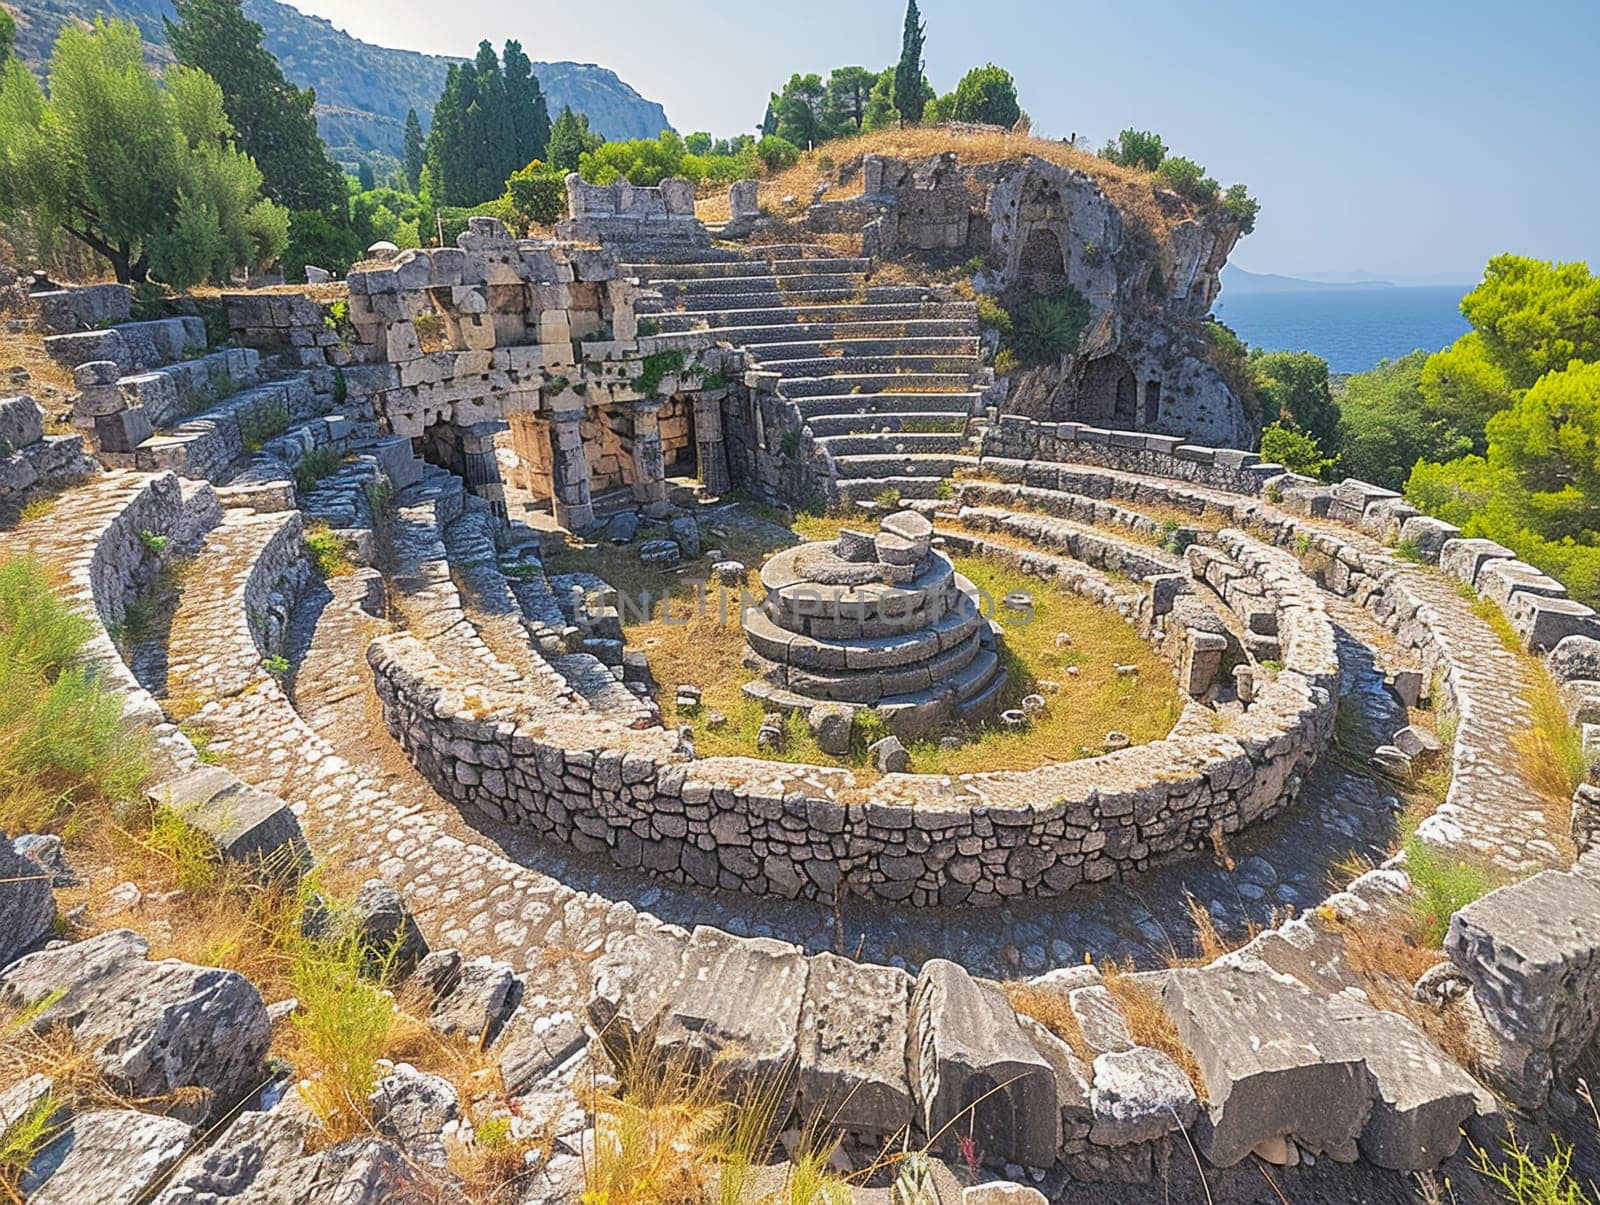 Greek Amphitheater Echoing Ancient Philosophical Debates, The stone tiers blur into a historical venue for thought and discourse.